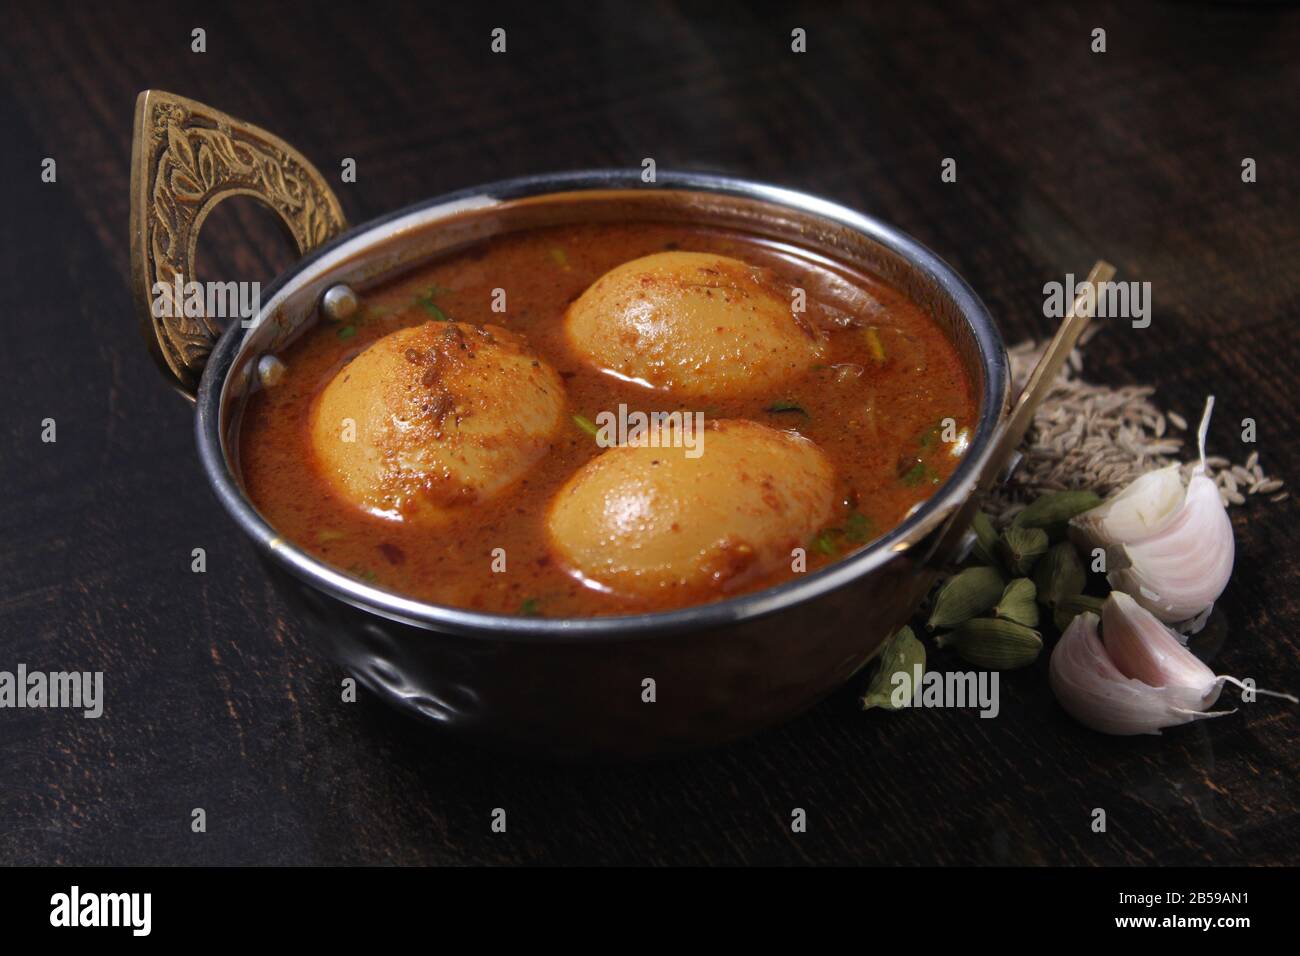 egg curry,curry dish Stock Photo